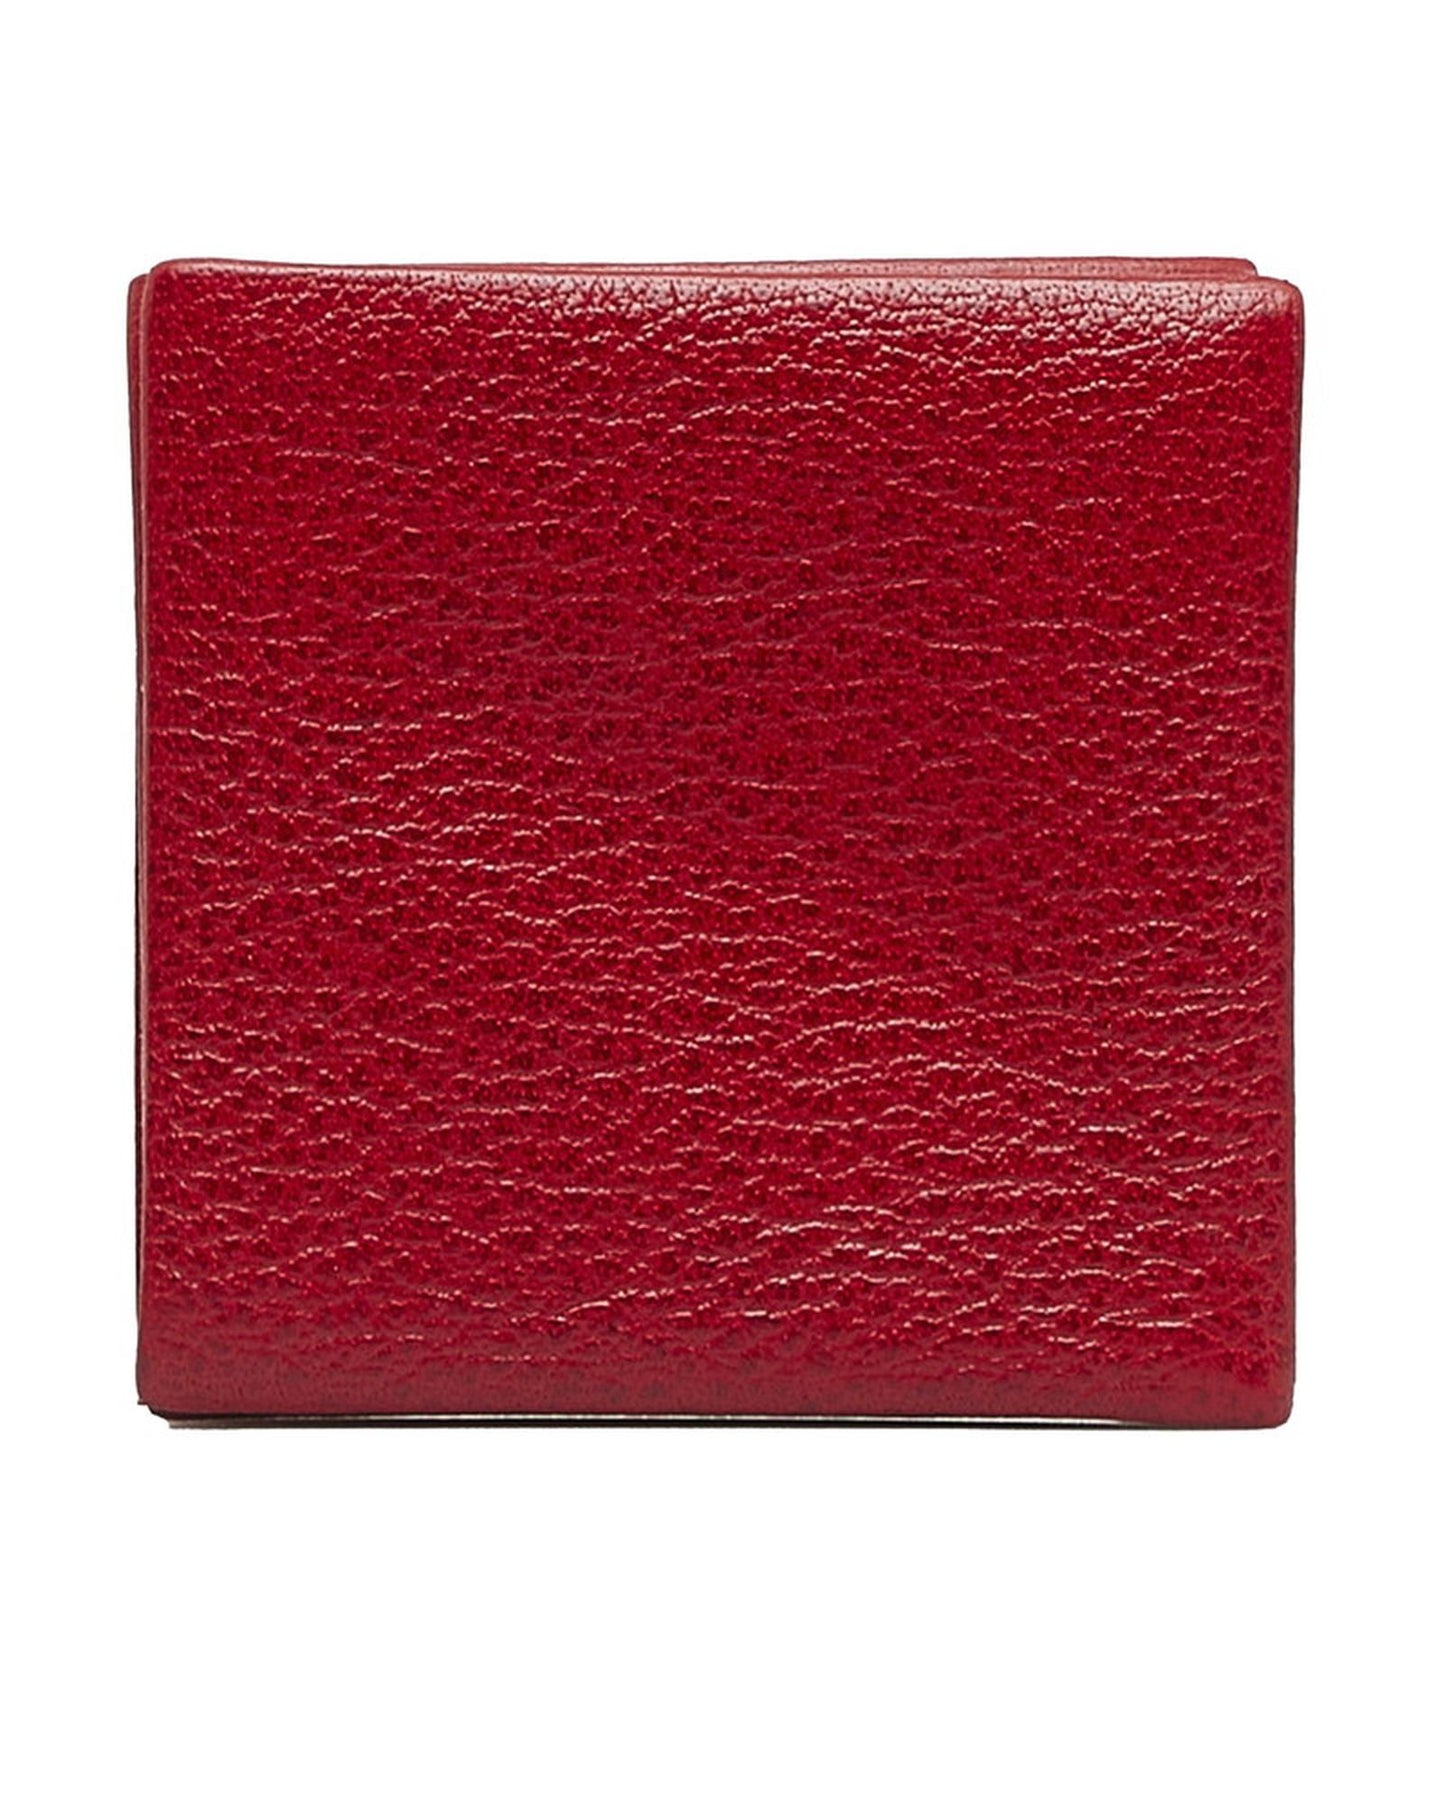 Hermes Women's Excellent Condition Red Zulu Coin Wallet in Red